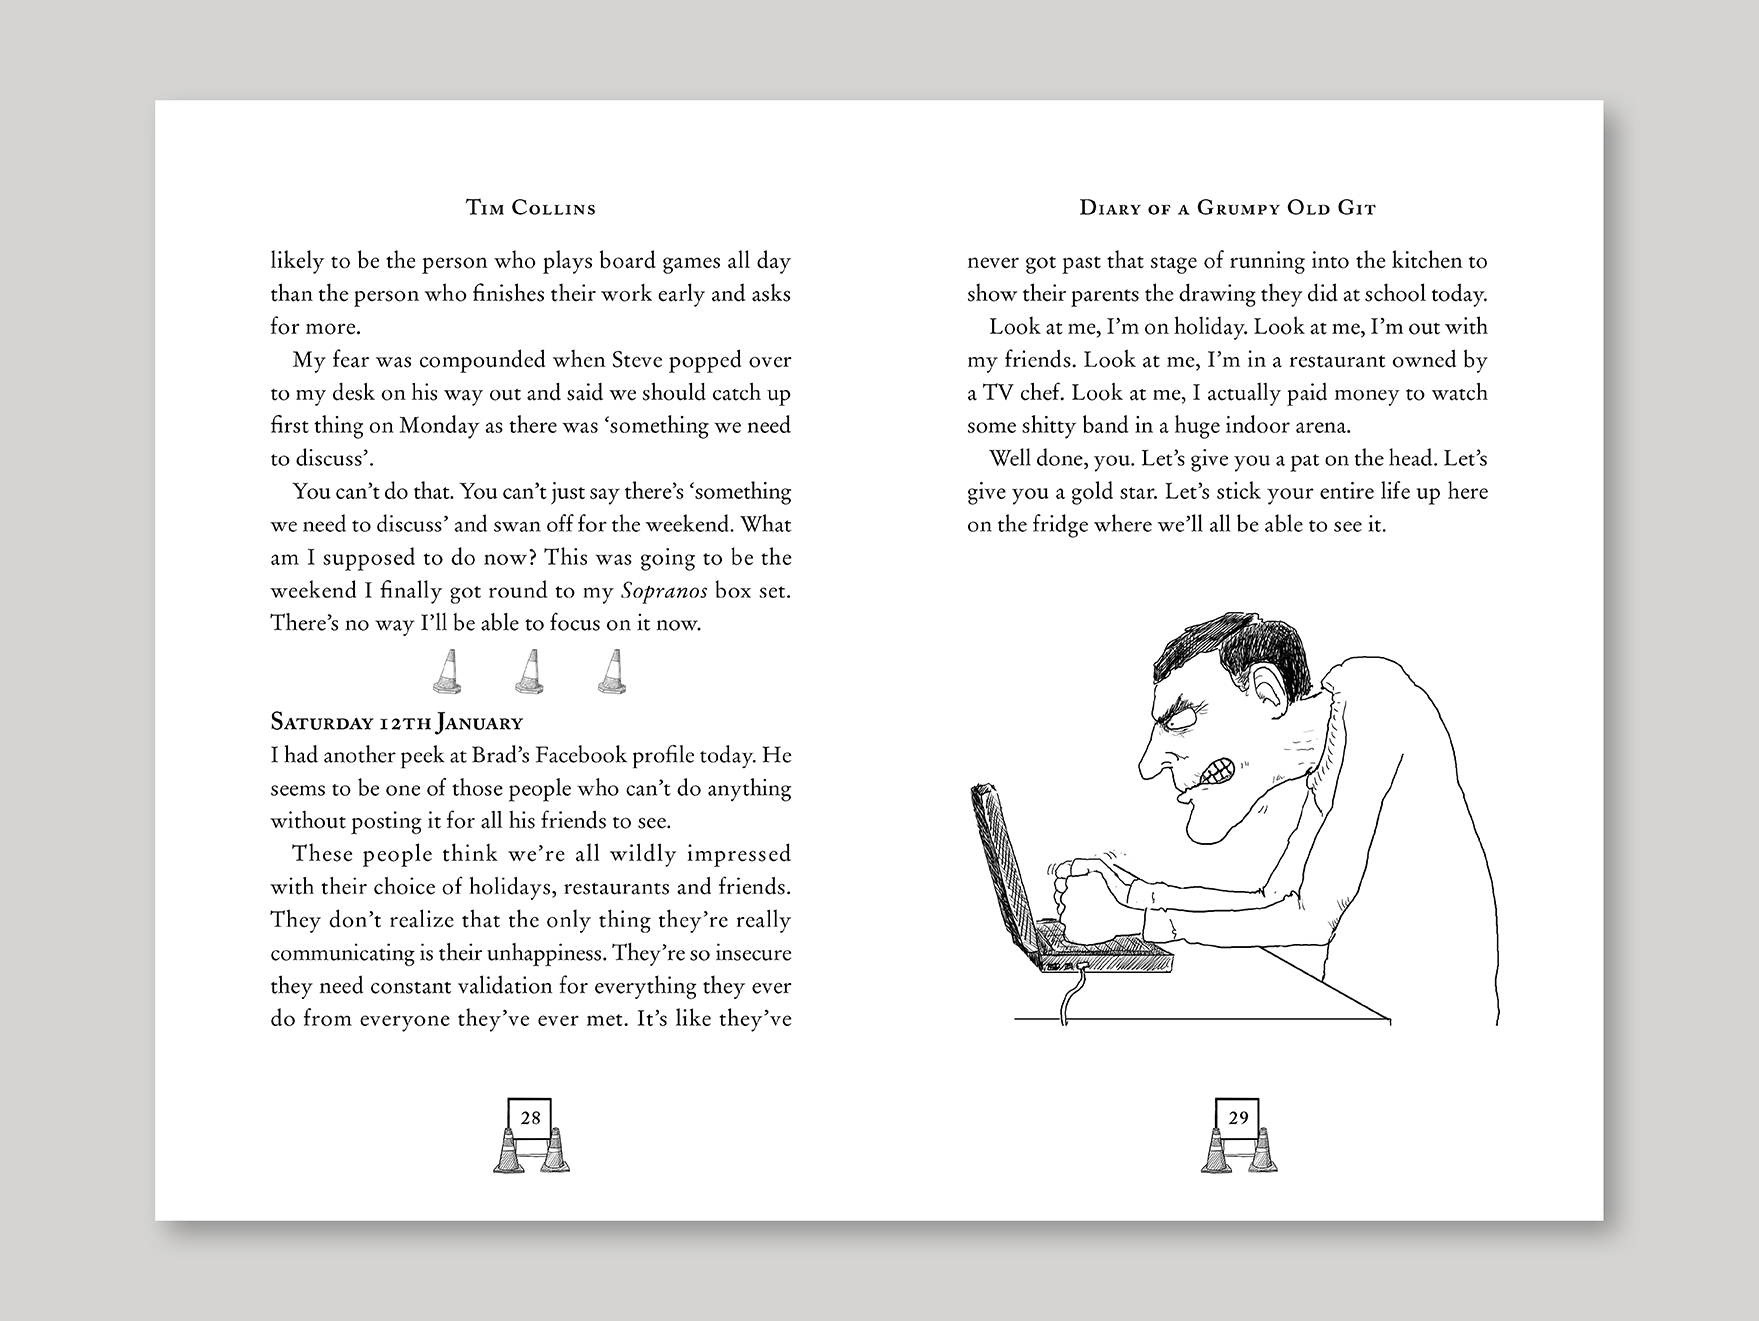 Inside pages from a typeset book with illustrations in the text